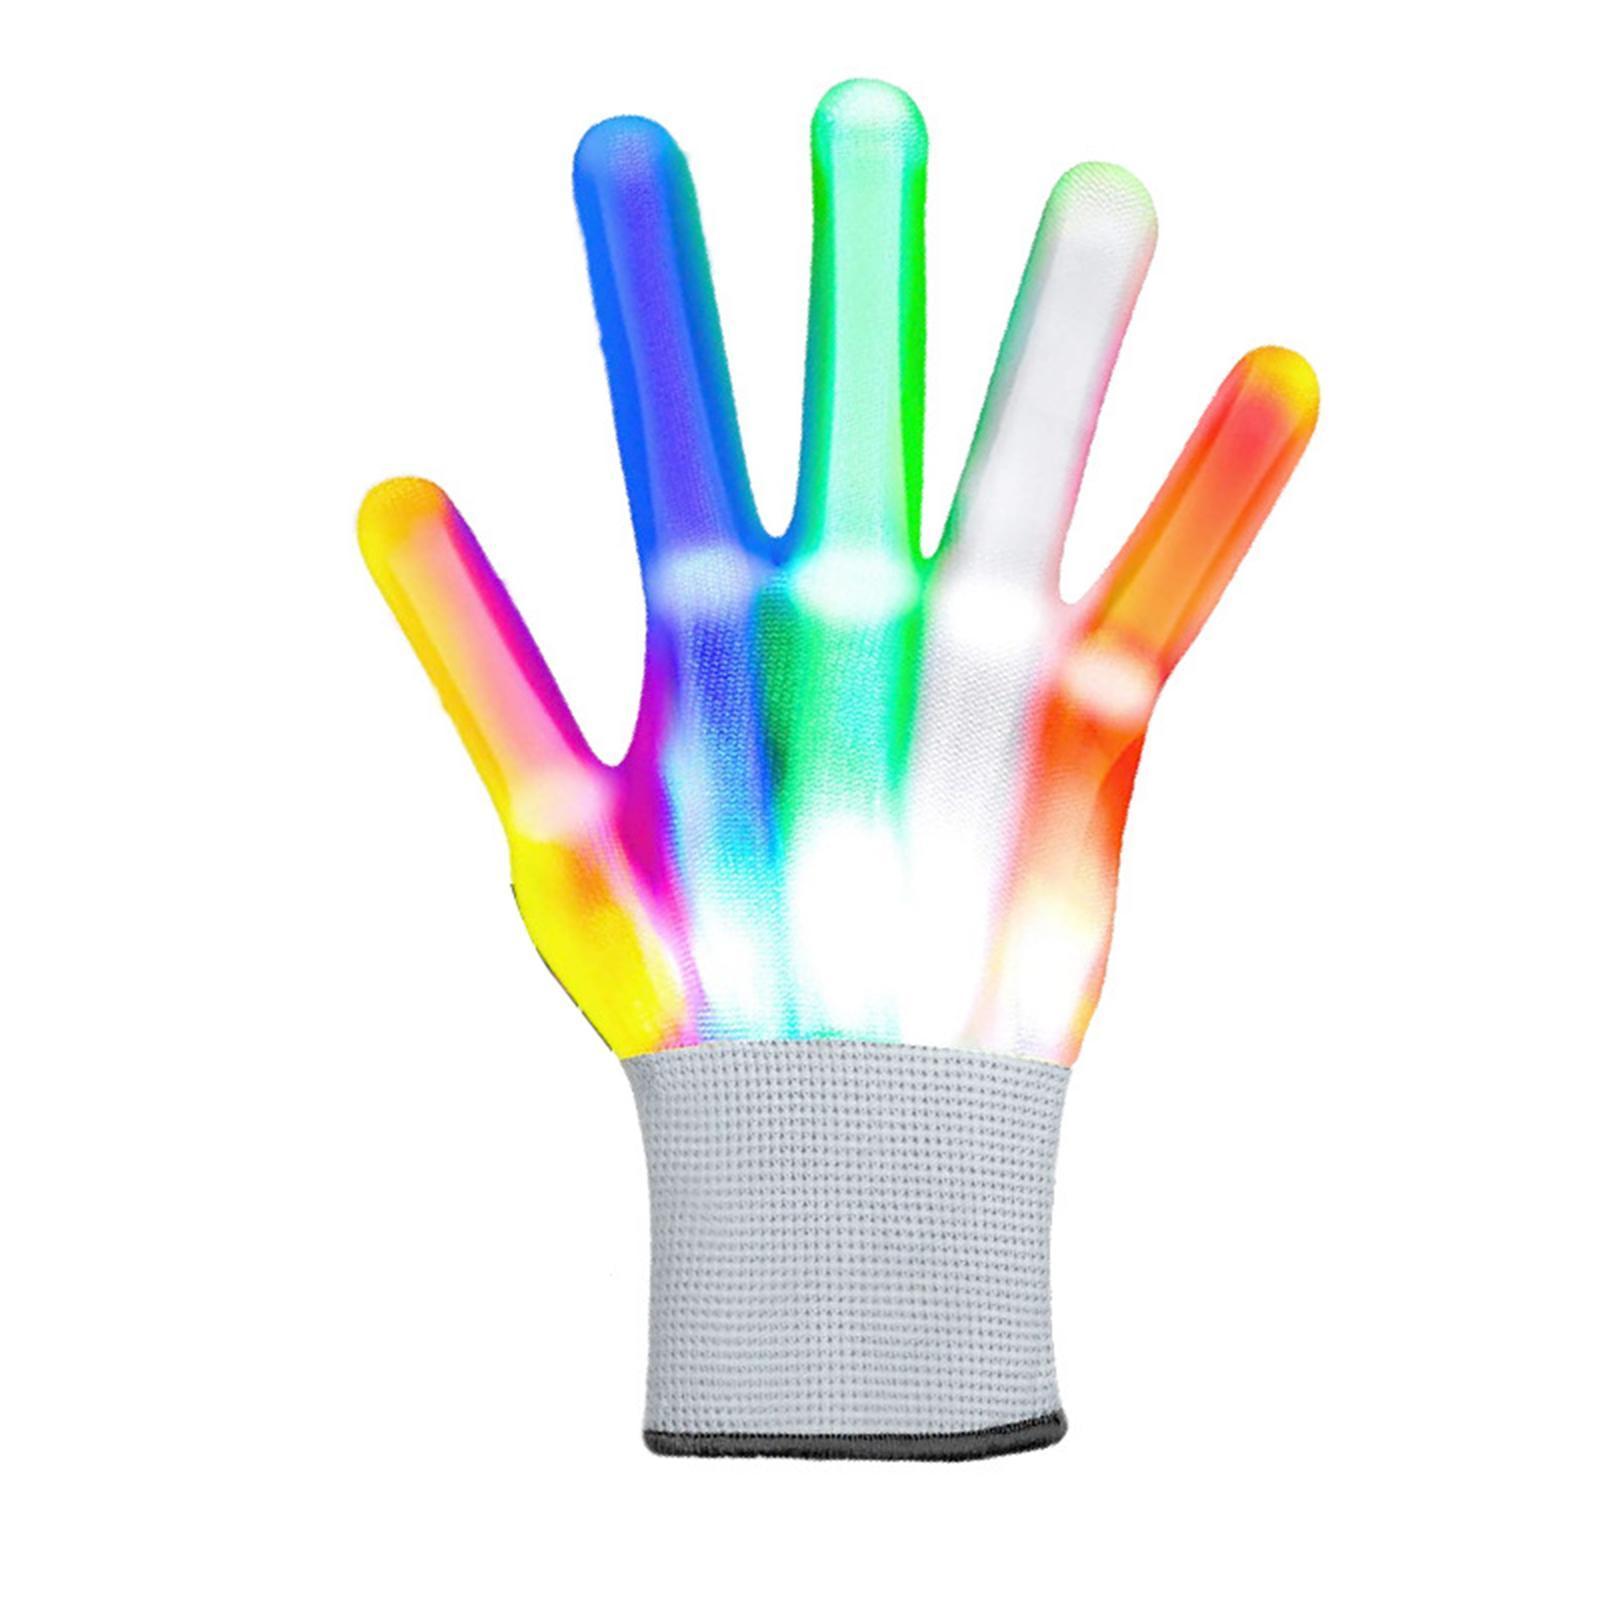 LED Light up Gloves Glow Performance Portable for Party Girls/Boys Teens